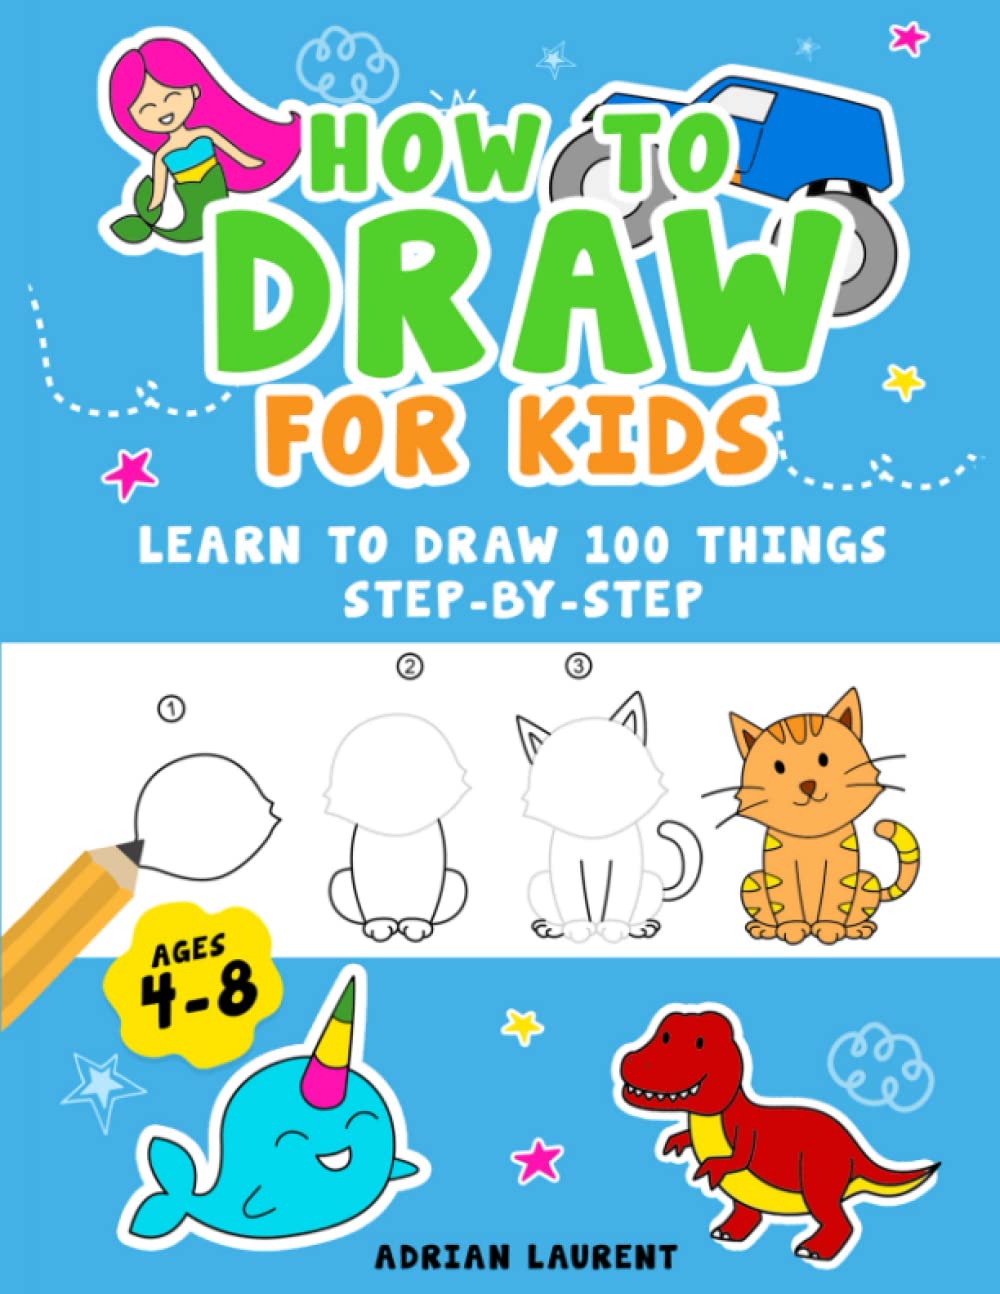 How to Draw for Kids - Learn To Draw 100 Things